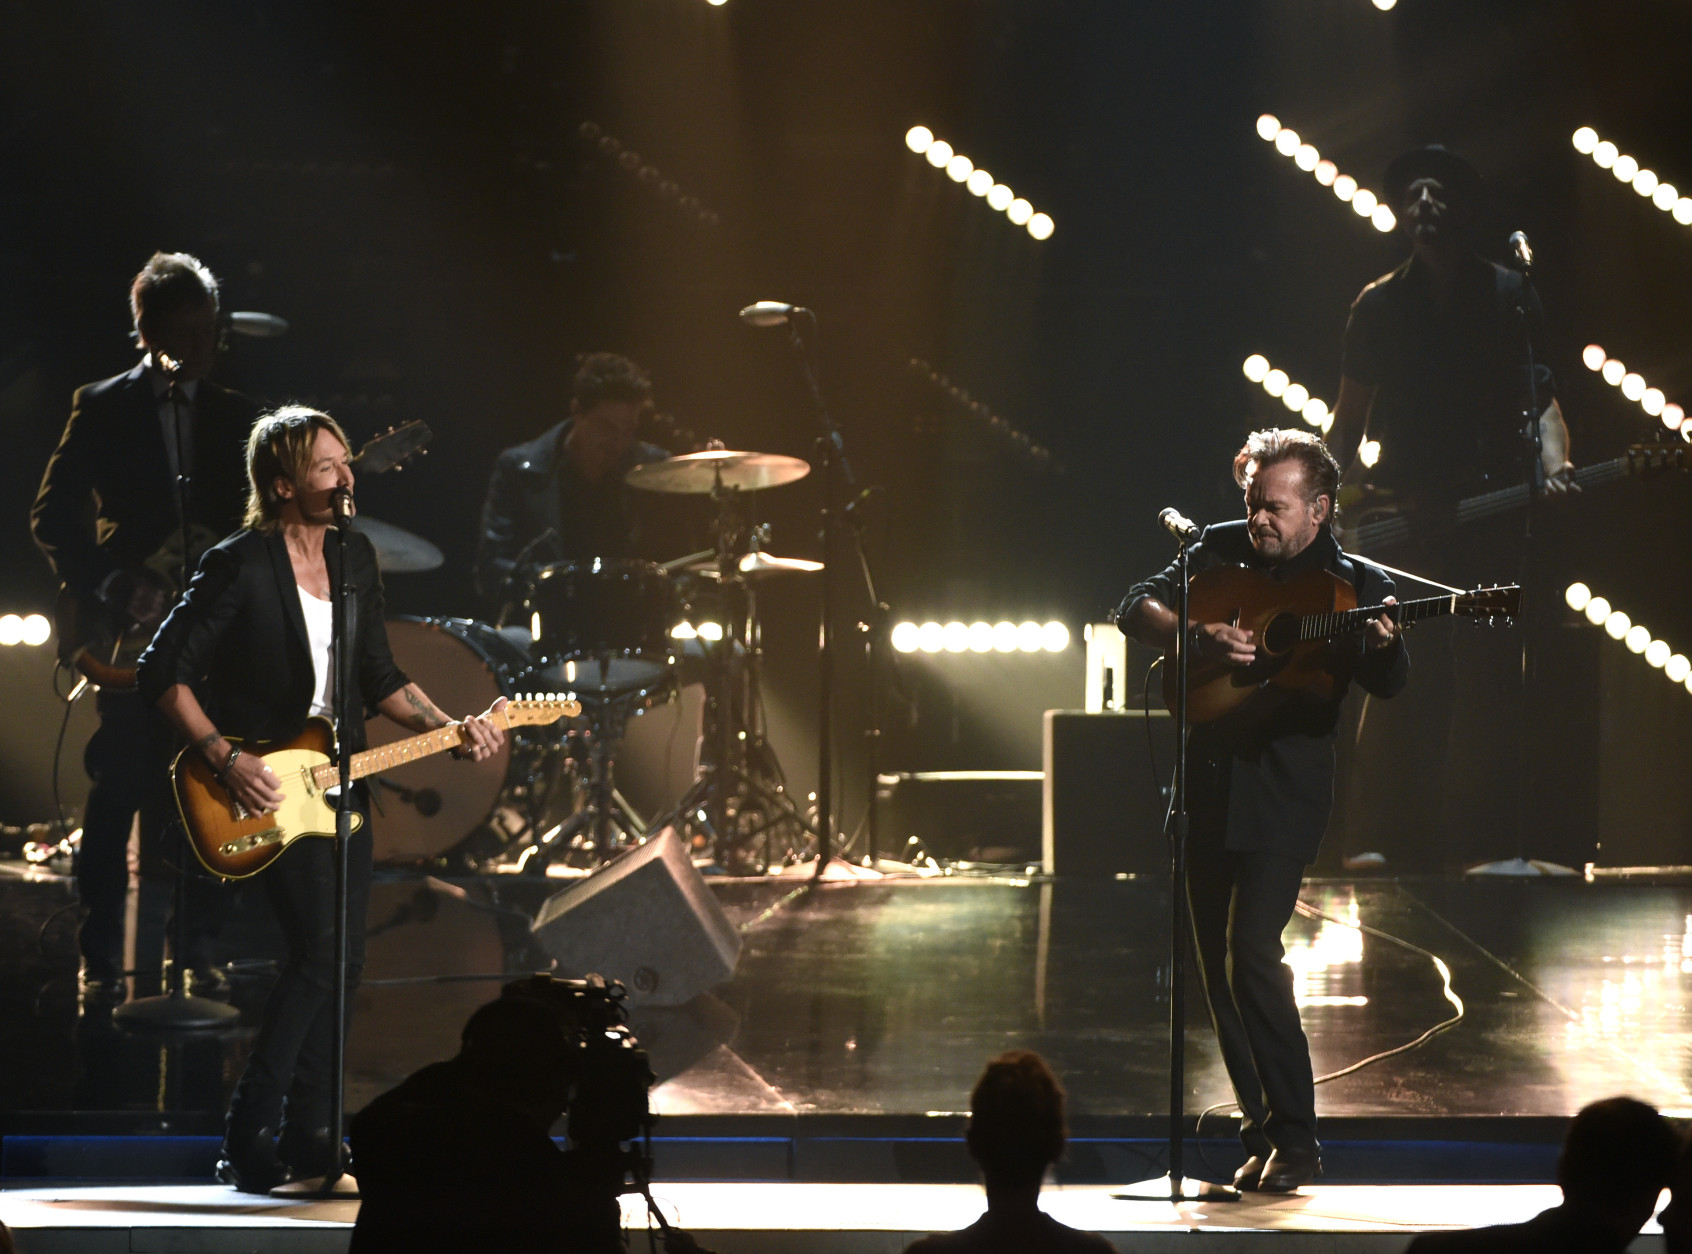 Keith Urban, left, and John Mellencamp perform at the 49th annual CMA Awards at the Bridgestone Arena on Wednesday, Nov. 4, 2015, in Nashville, Tenn. (Photo by Chris Pizzello/Invision/AP)